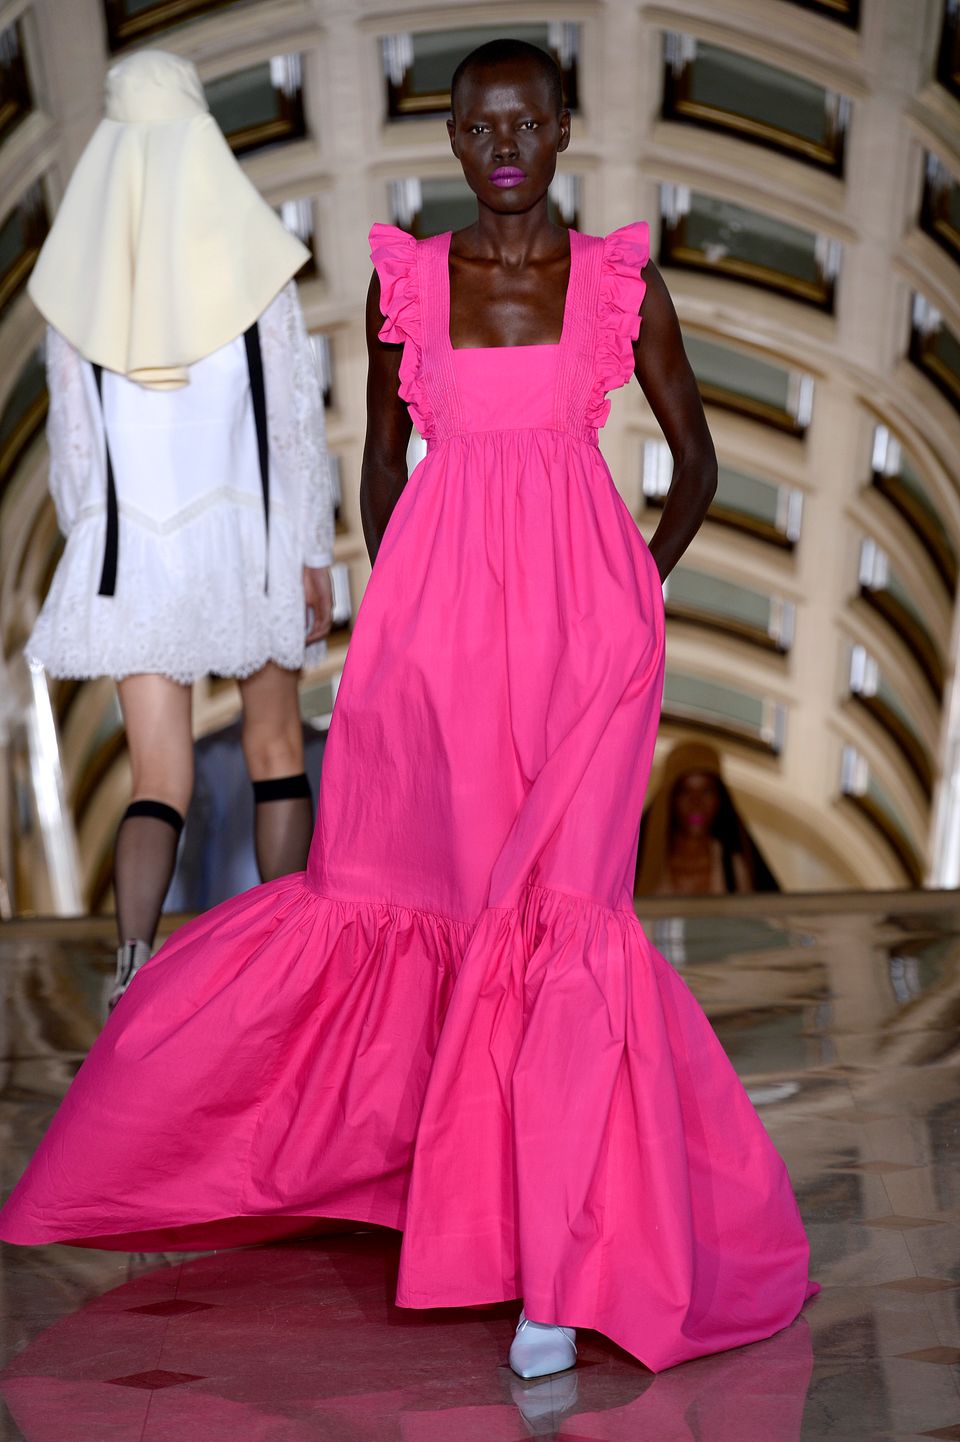 New York Fashion Week: 30 Most Epic Dresses On The Runway